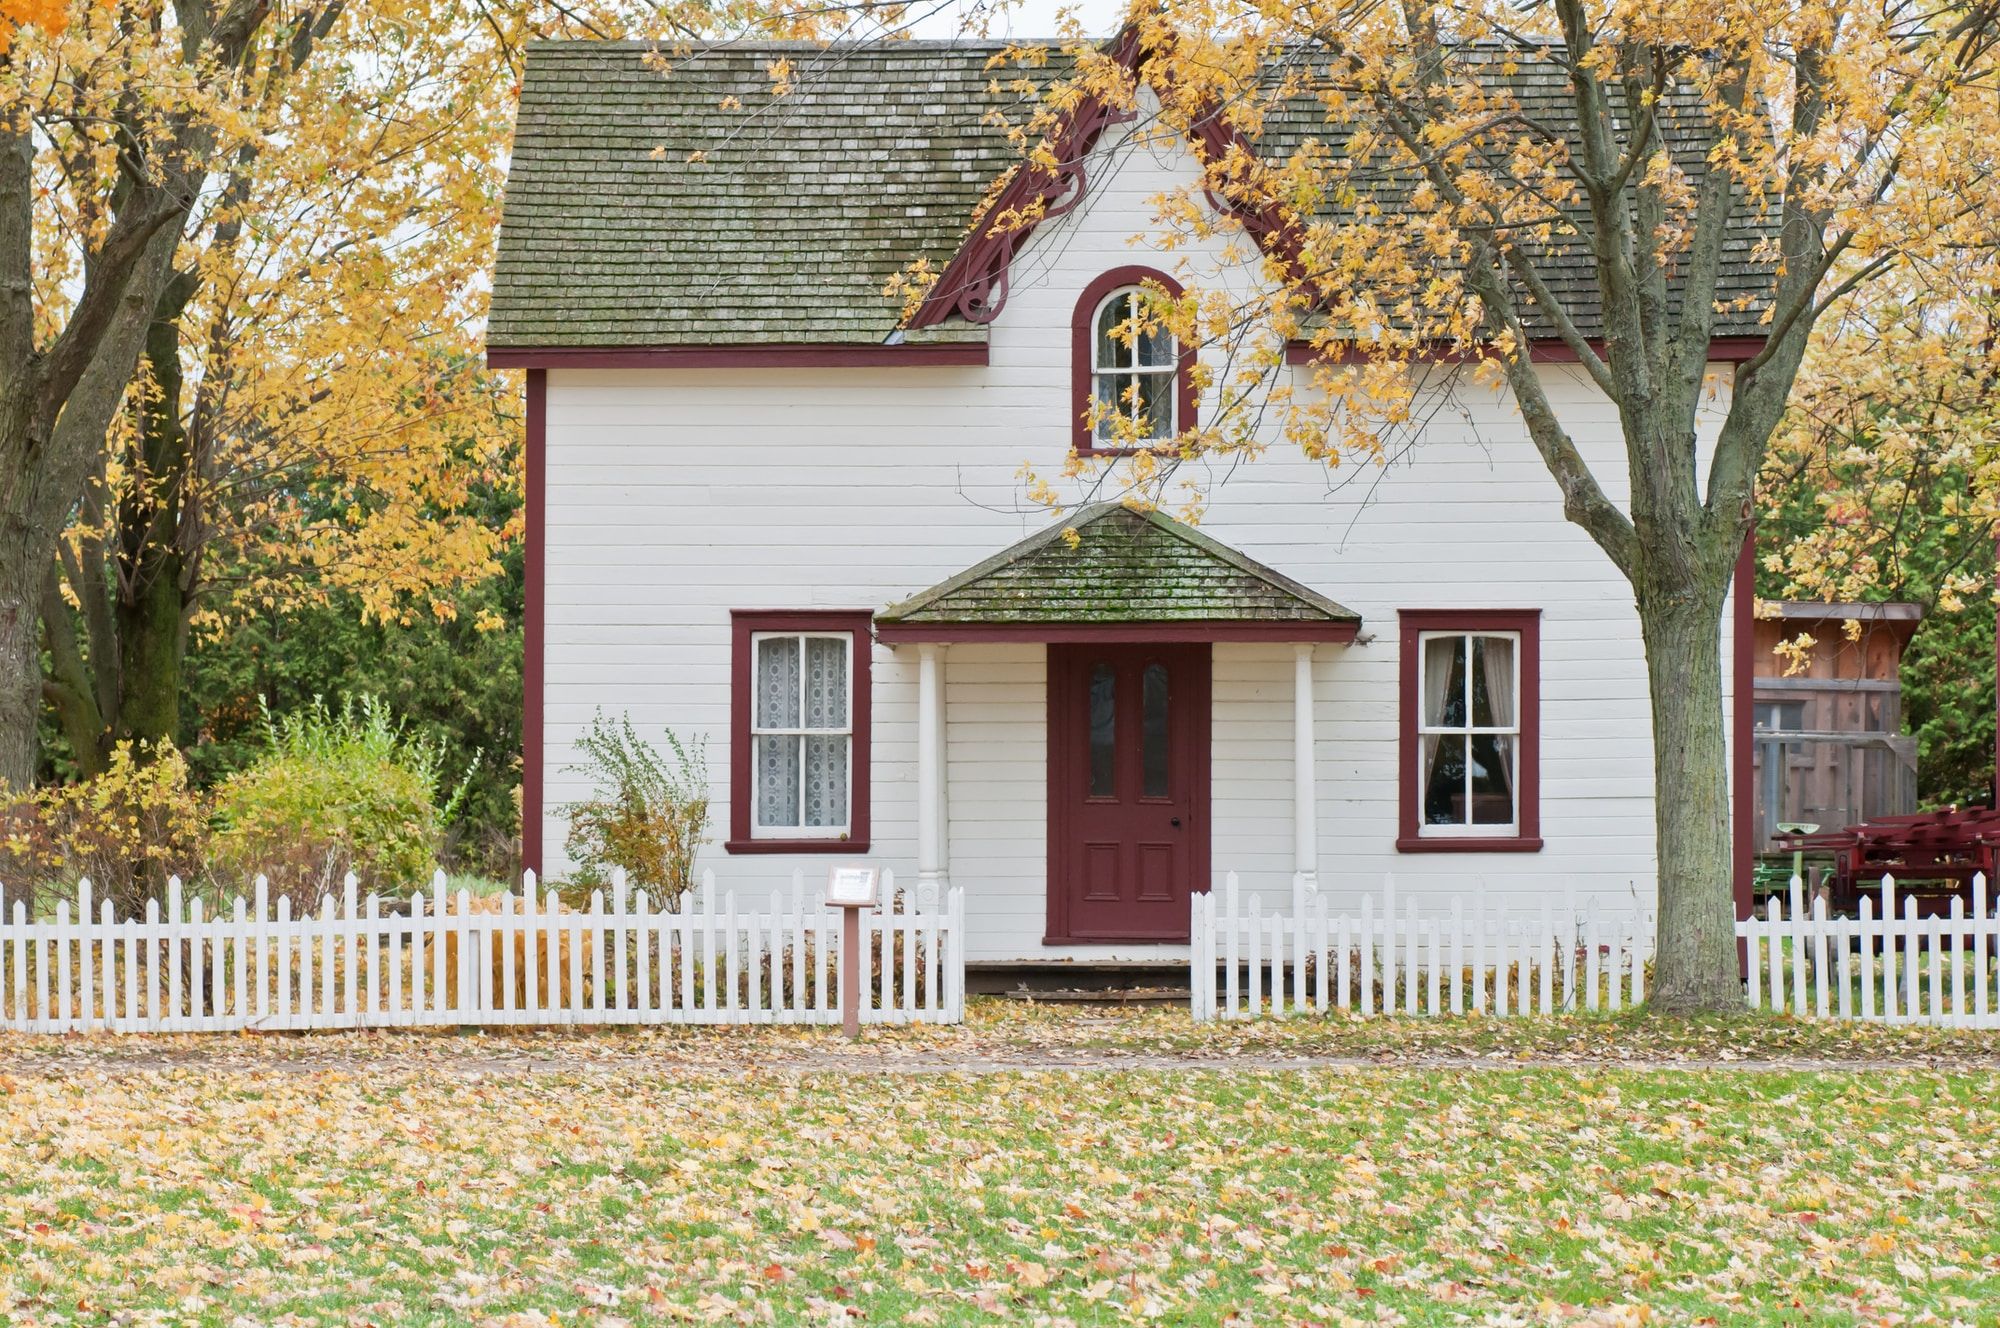 A country home painted white with red doors and windows